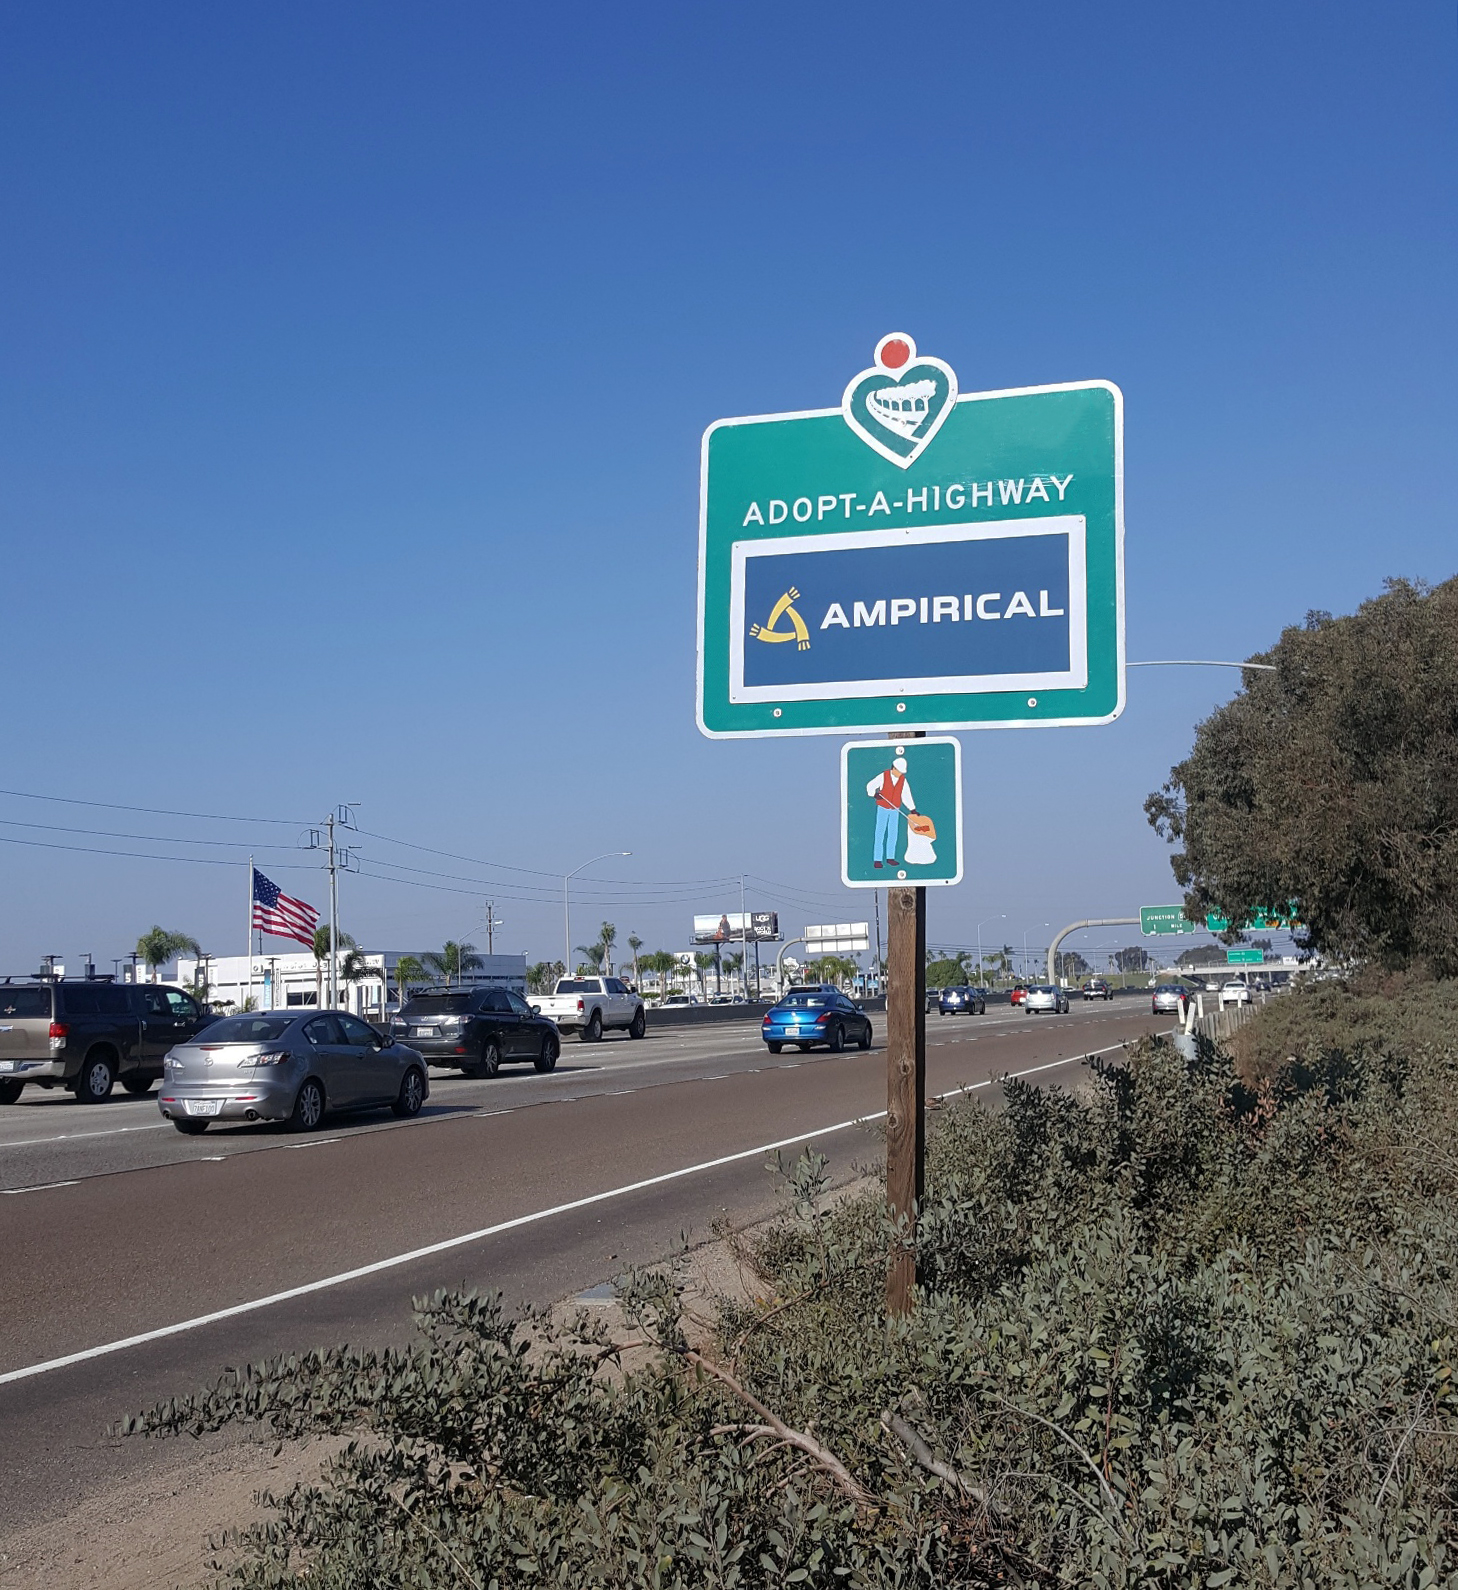 Amprical is the newest member of the California Adopt A Highway Program.